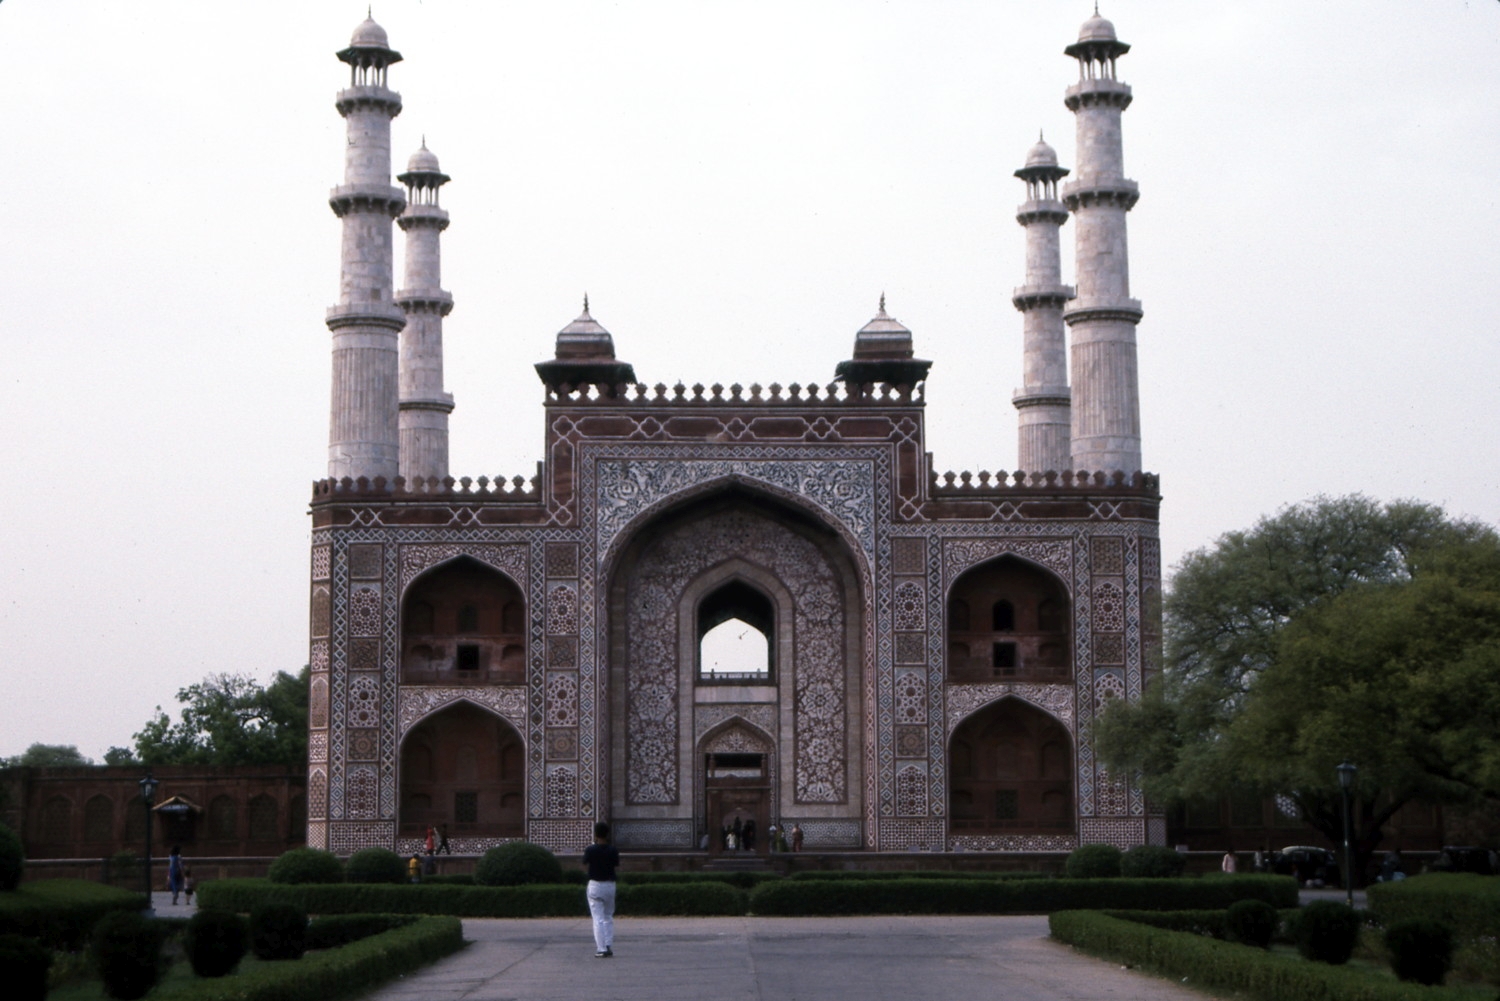 Front view of the southern gate to the tomb complex